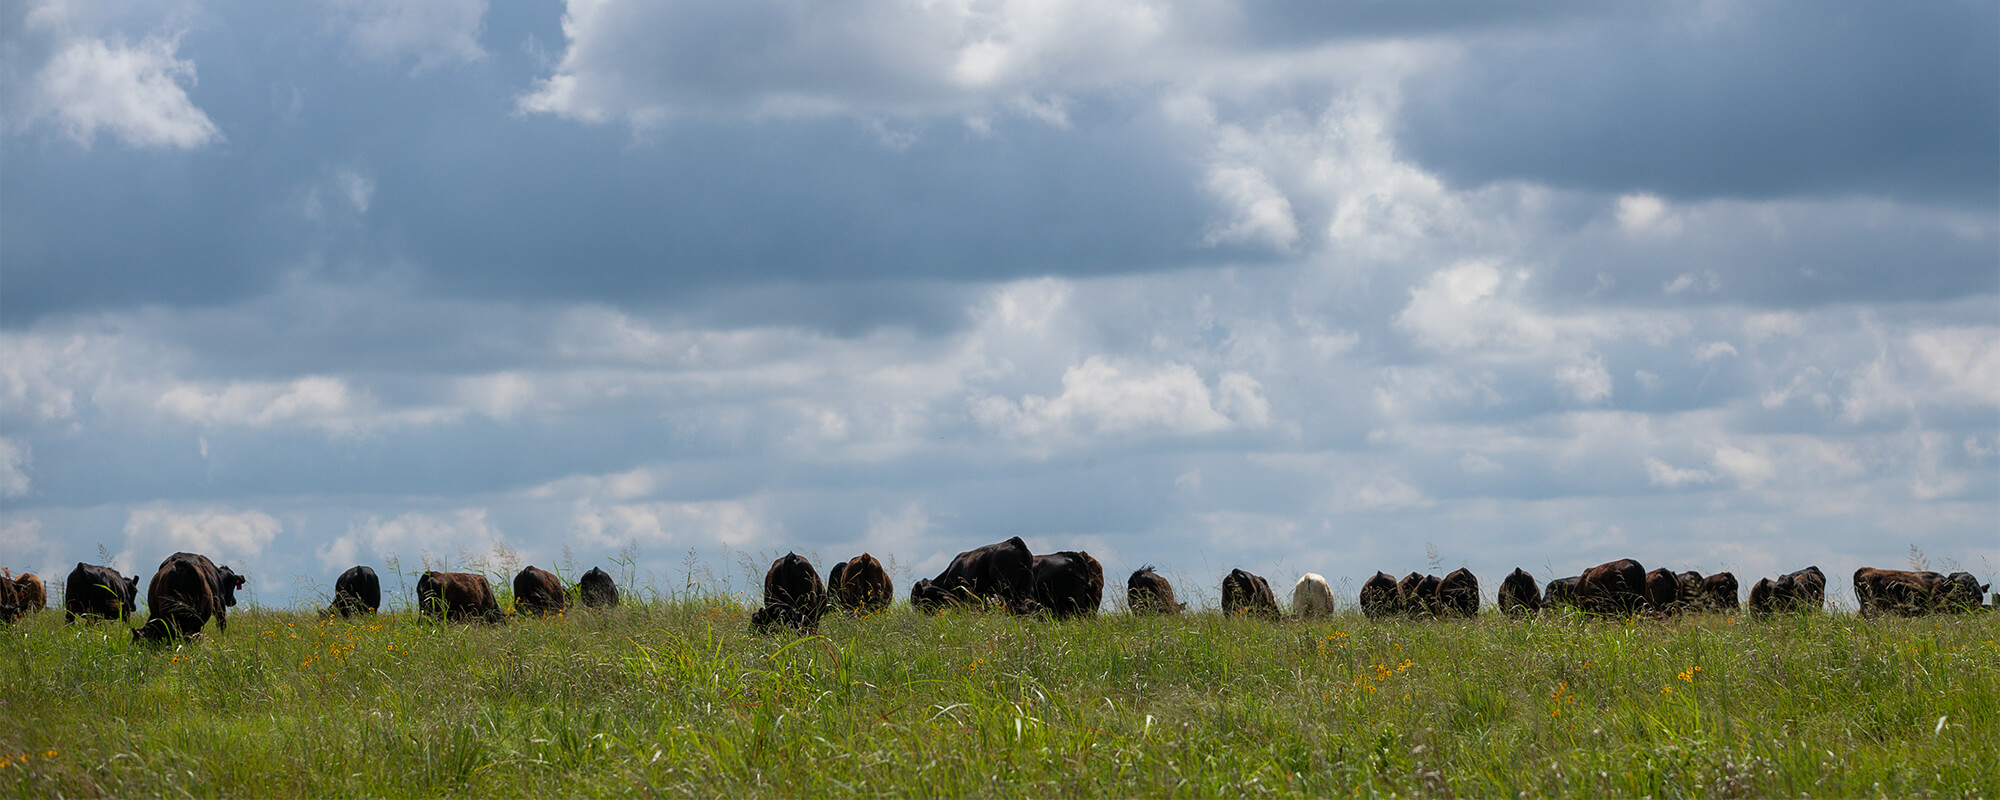 Cattle grazing in a pasture on the horizon